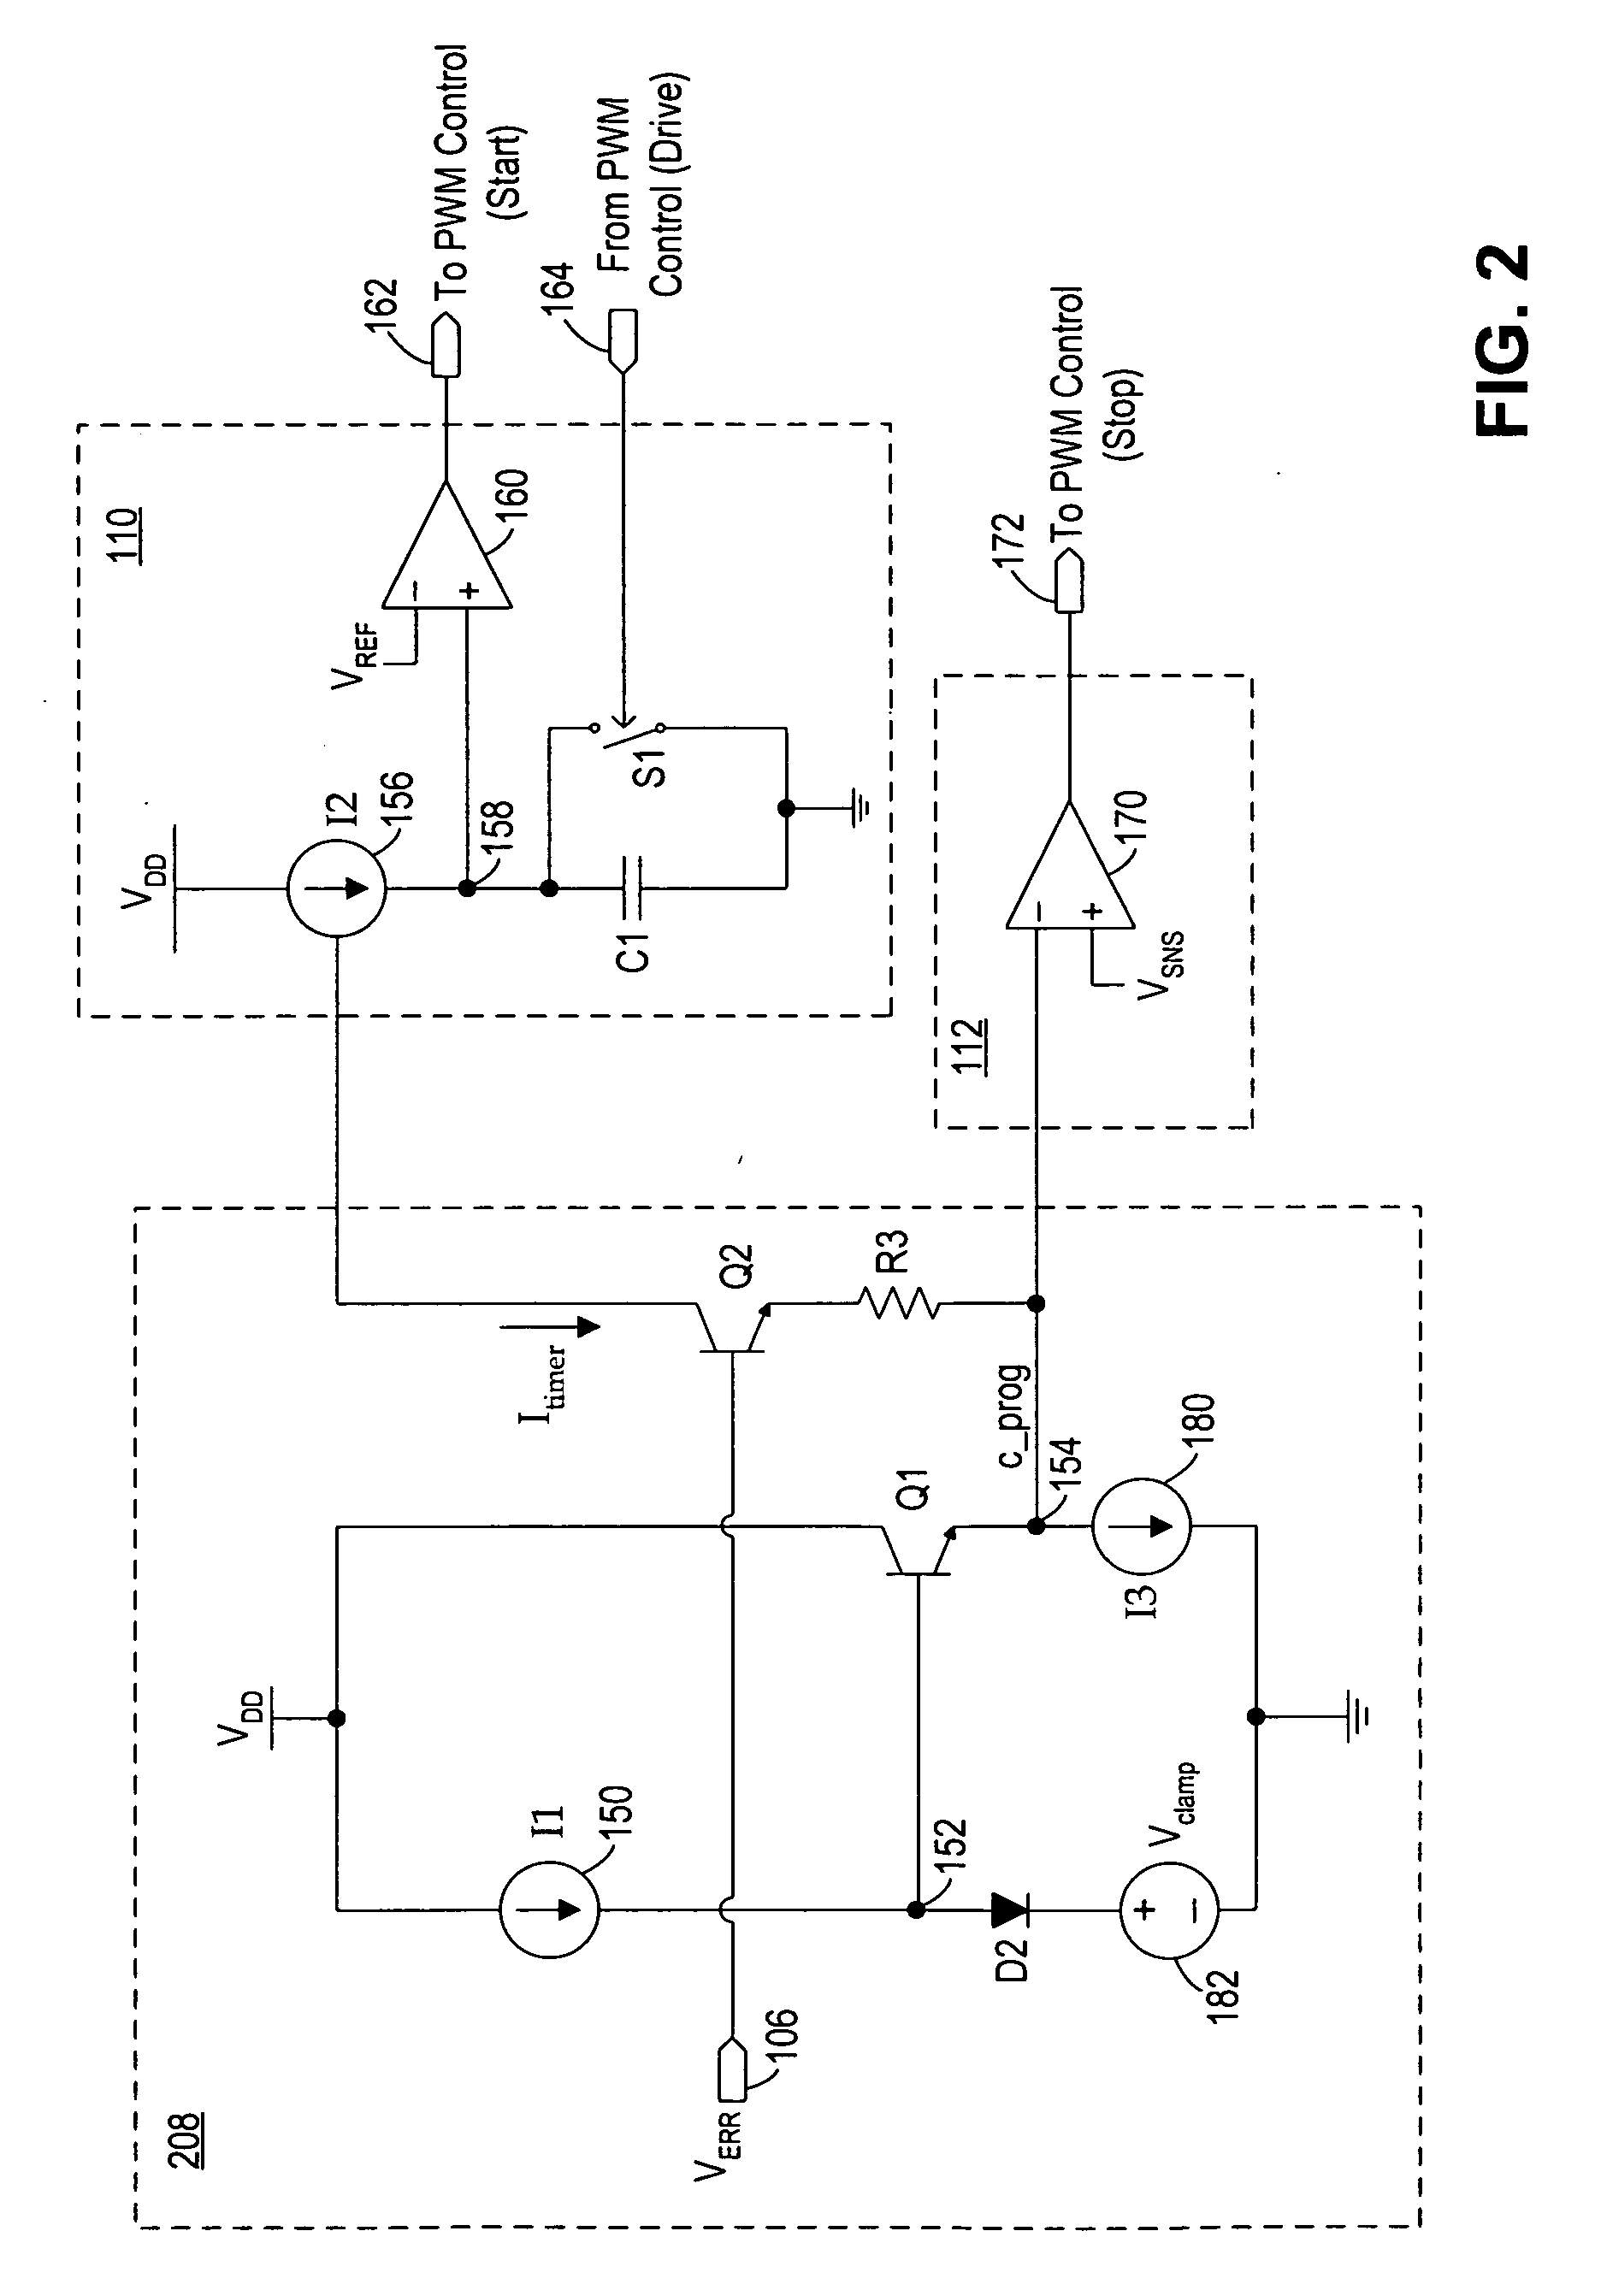 PFM and current controlled switching regulator